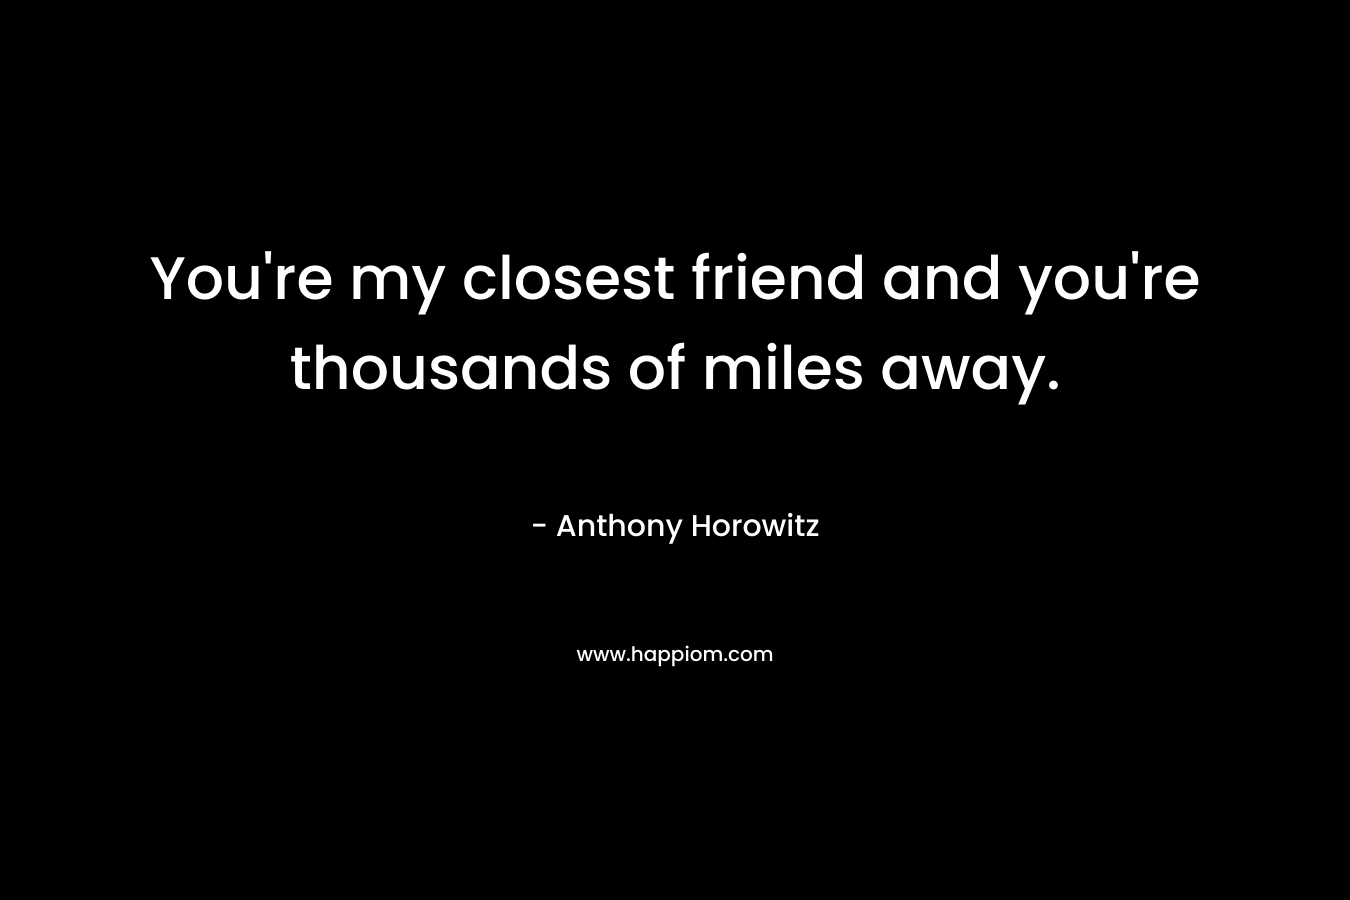 You’re my closest friend and you’re thousands of miles away. – Anthony Horowitz